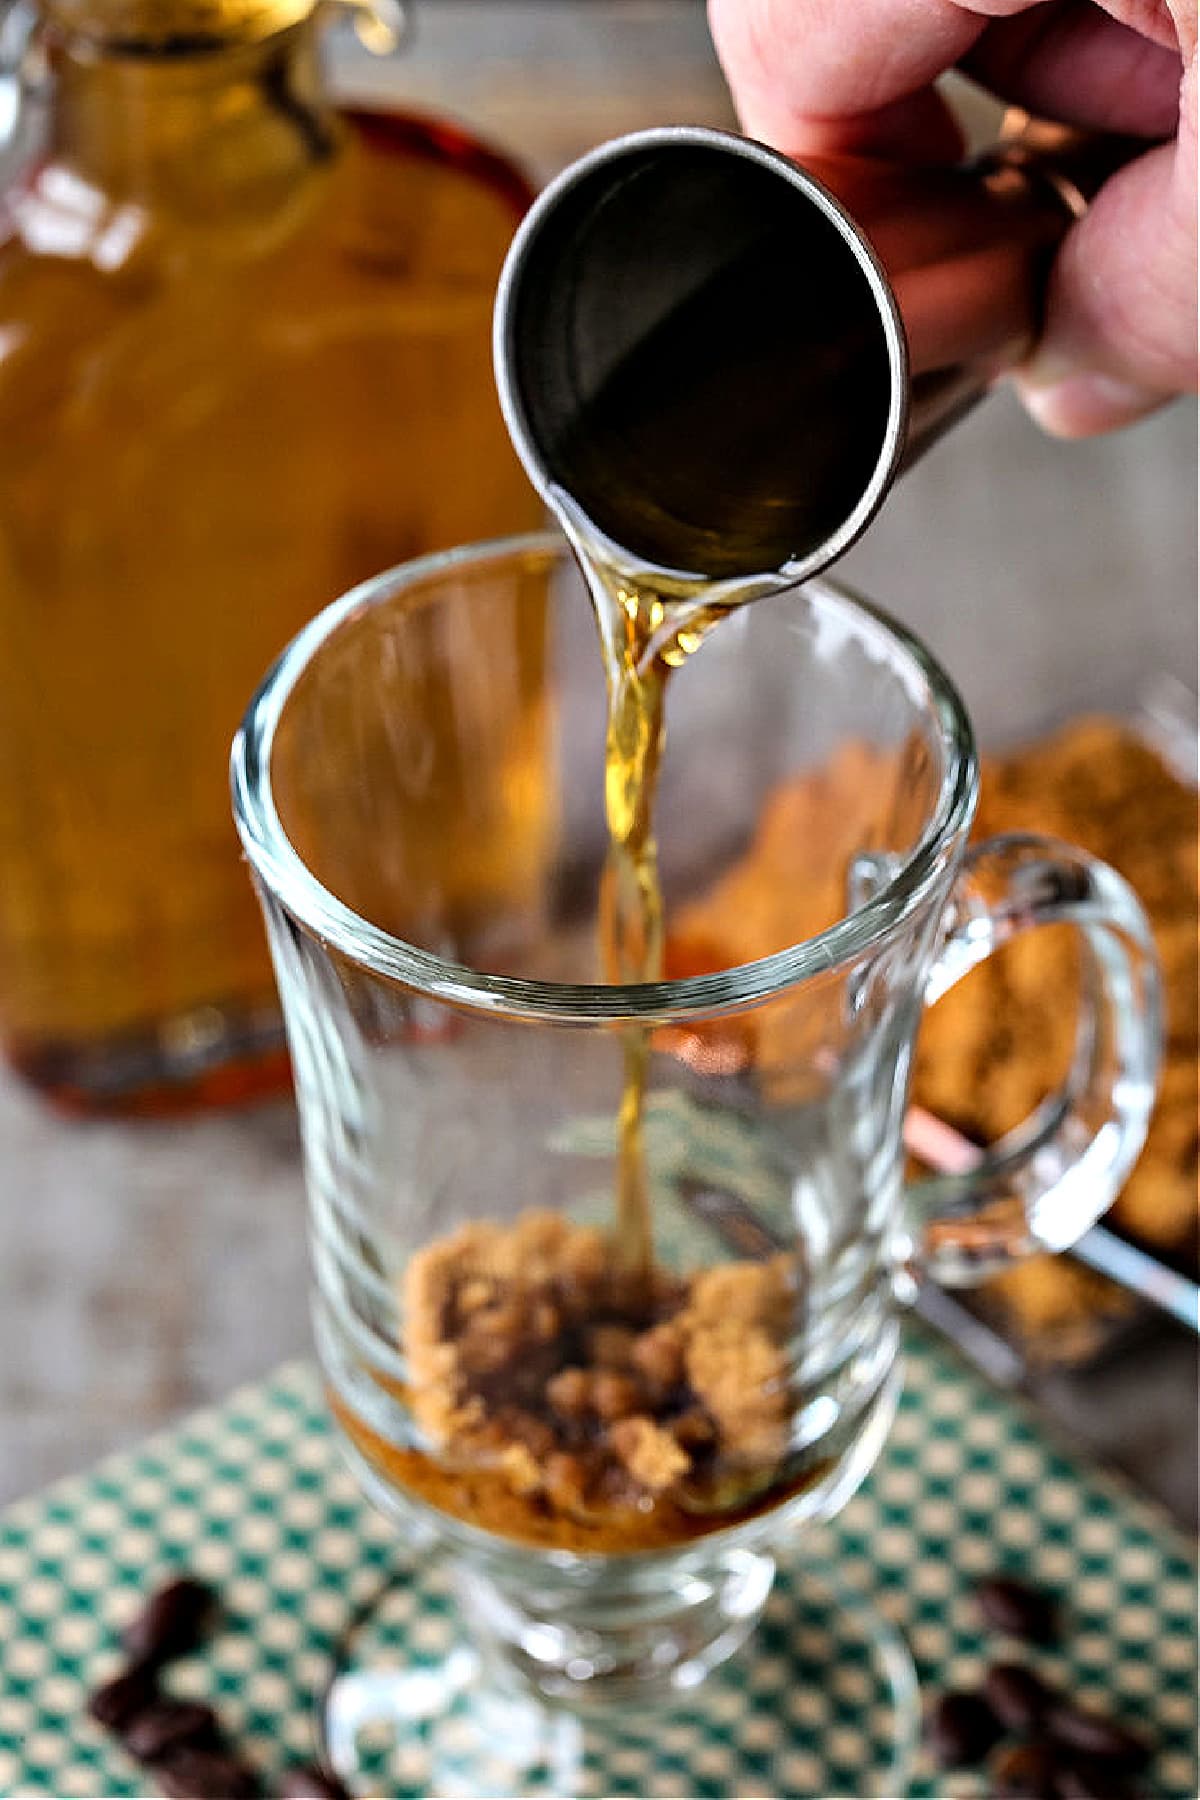 whiskey being poured into glass mug with brown sugar